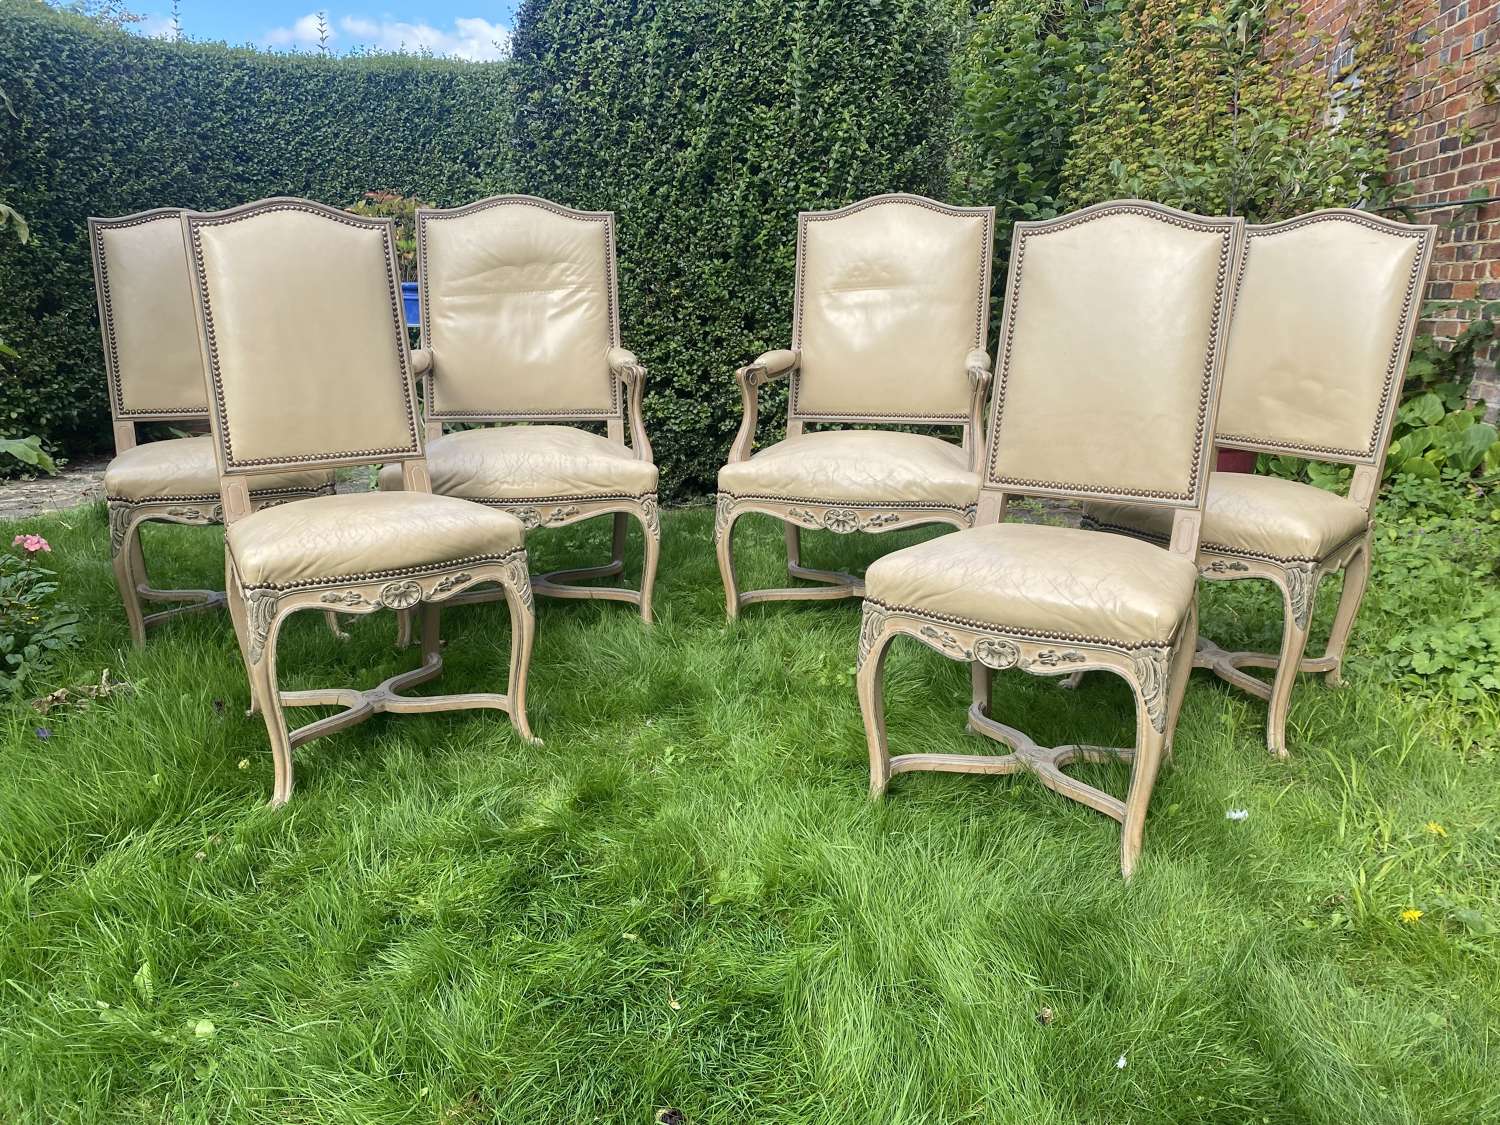 Six cream leather dining chairs